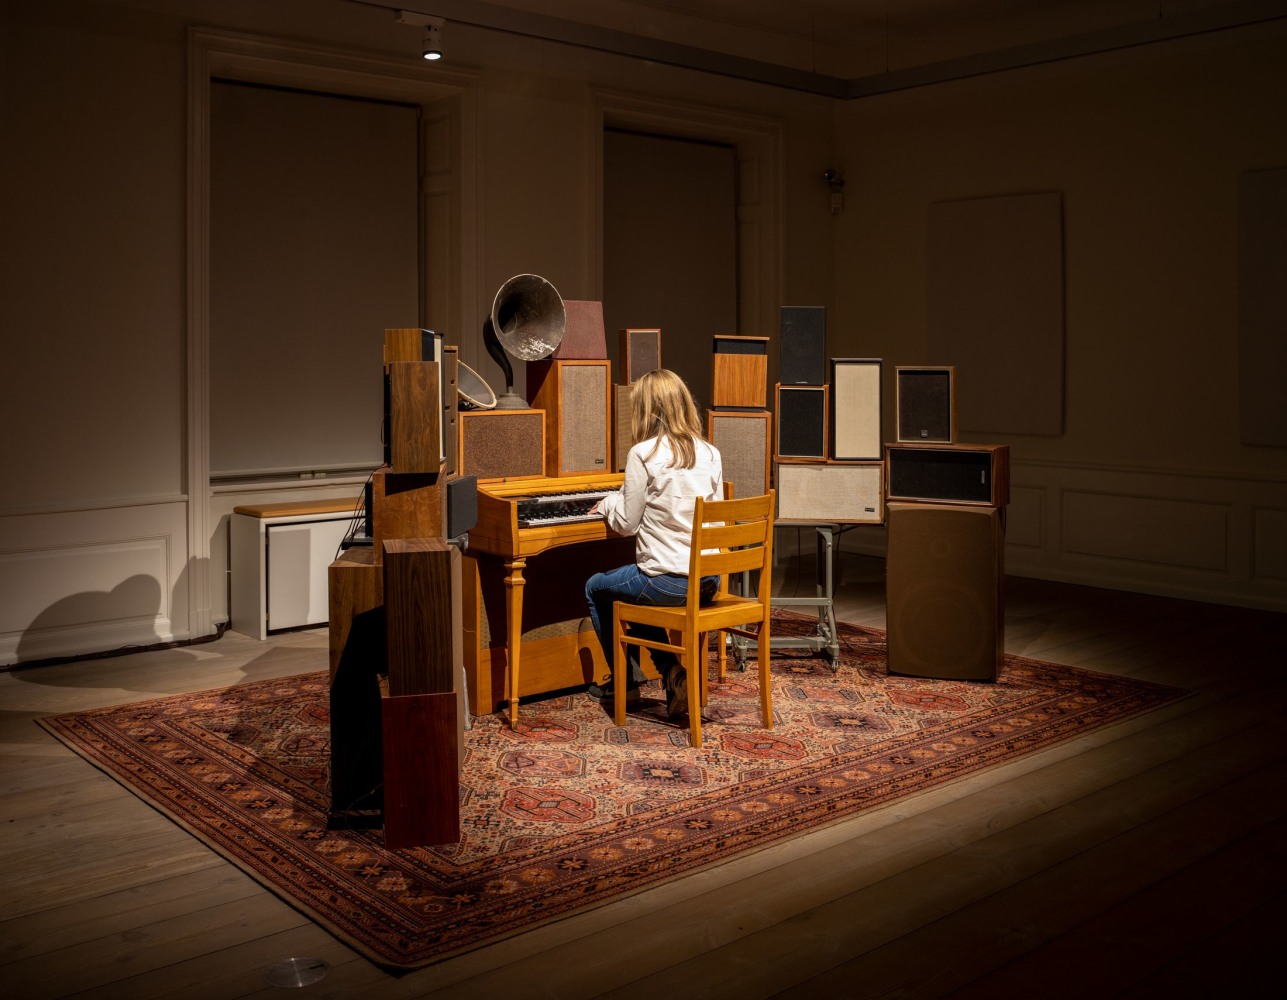 Janet Cardiff and George Bures Miller
The Poetry Machine,&amp;nbsp;2017
Interactive audio/mixed-media installation including organ, speakers, carpet, computer and electronics
Dimensions variable
Installation view,&amp;nbsp;Leonard Cohen: A Crack in Everything
October 24, 2019 &amp;ndash; August 2, 2020
Kunstforeningen GL STRAND, Copenhagen, Denmark
Photo:&amp;nbsp;Jan Sõndergaard